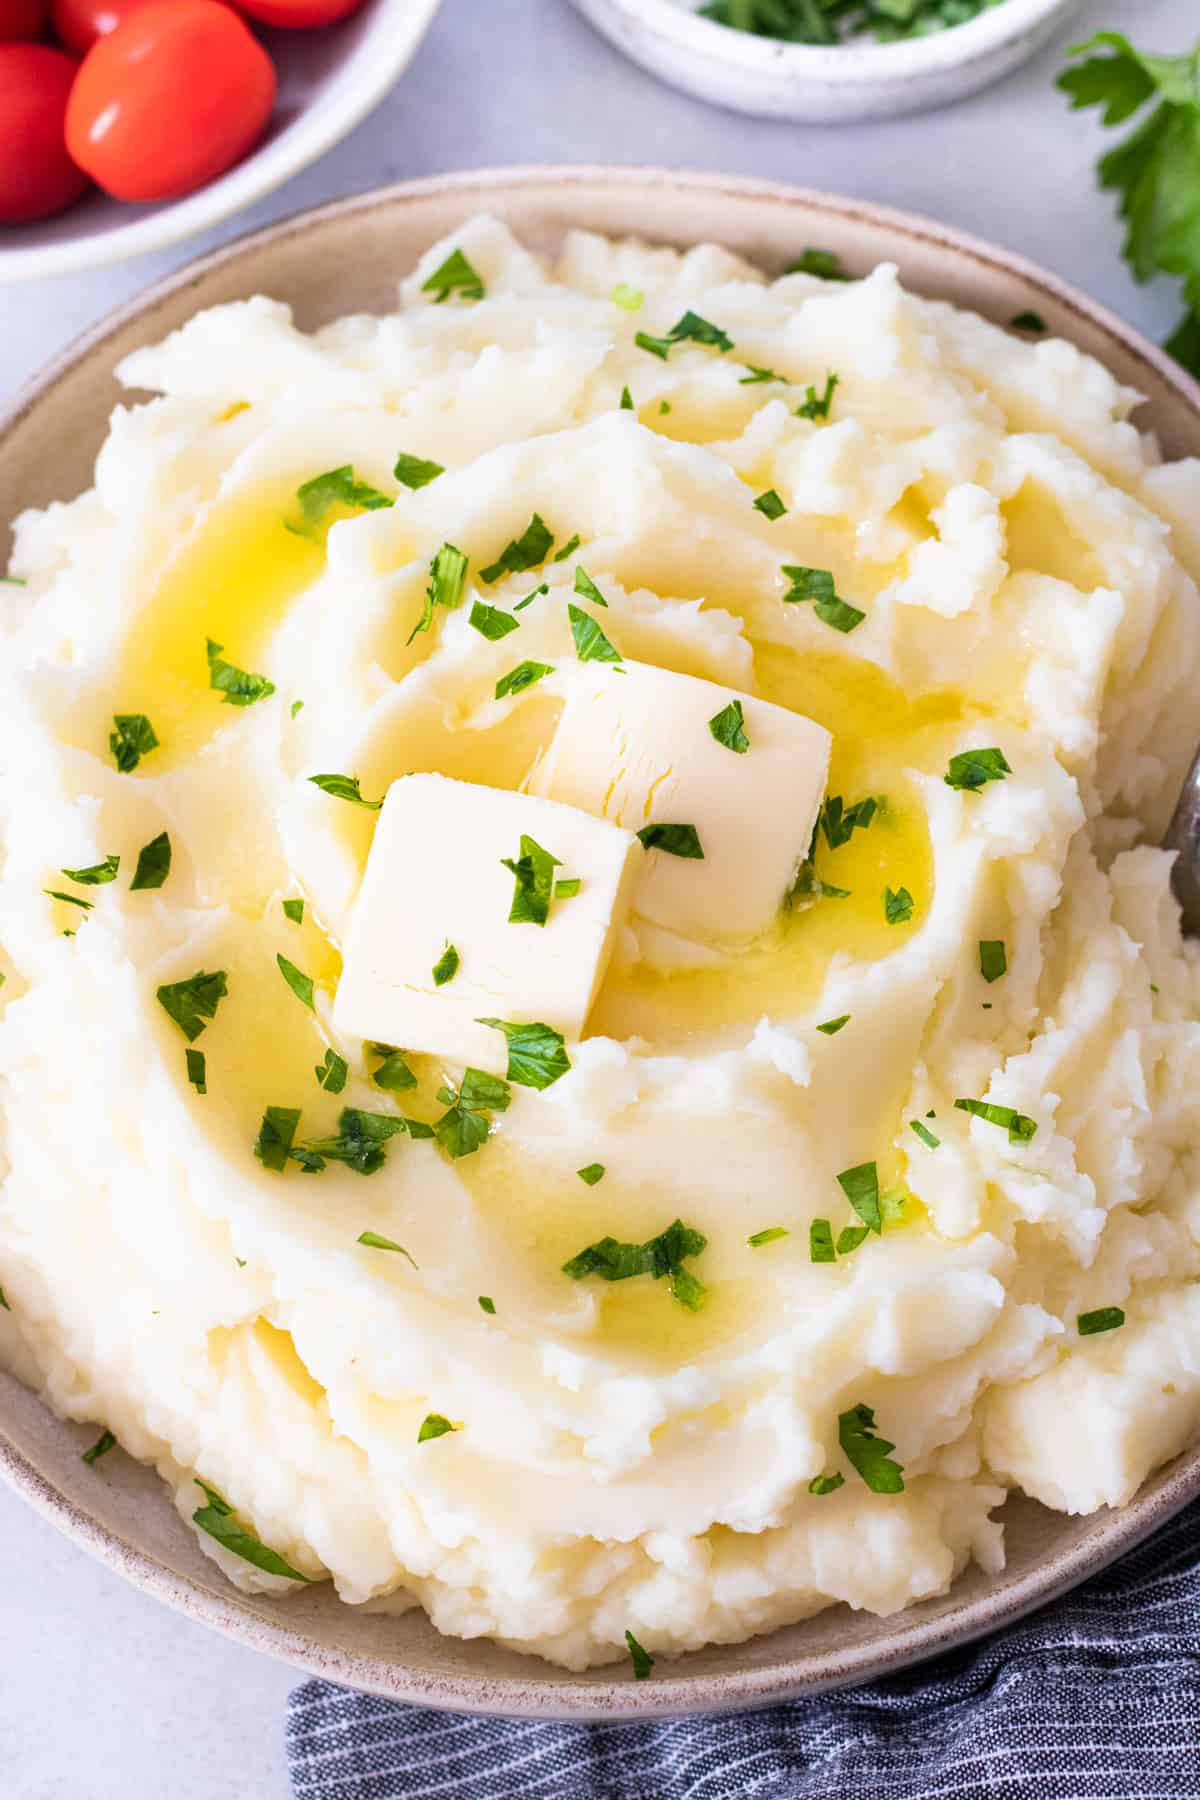 Mashed potatoes, topped with butter and chopped parsley in a bowl.